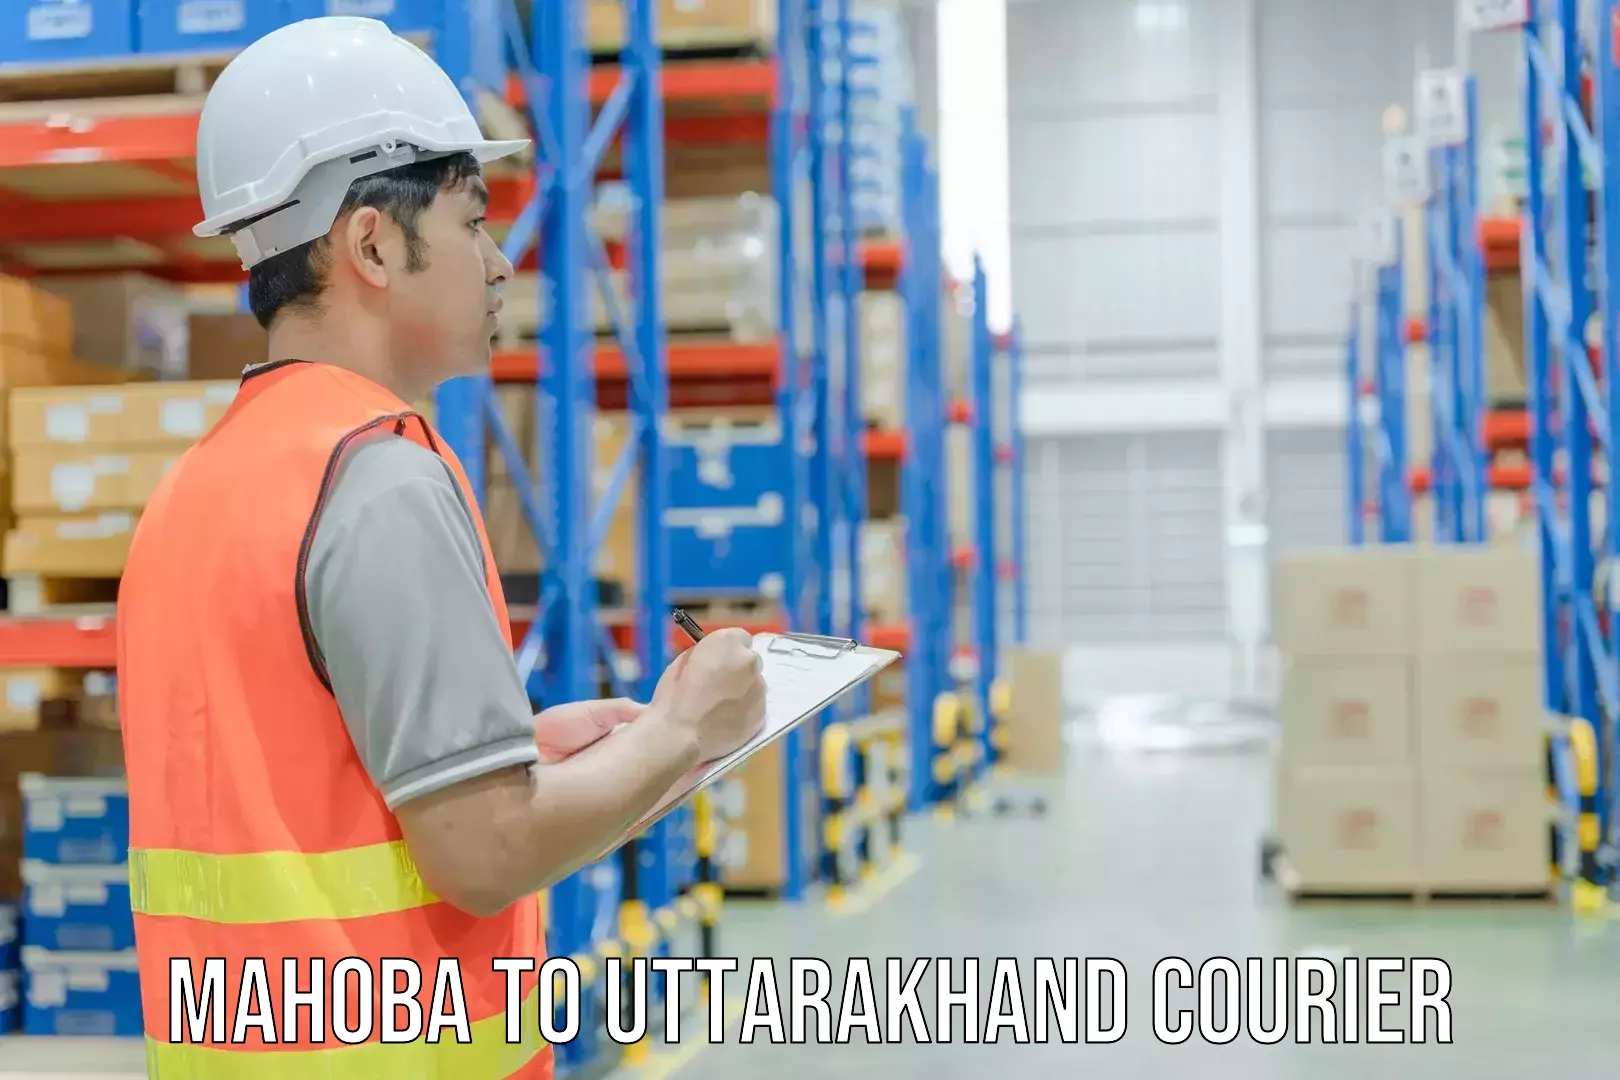 Local delivery service Mahoba to Uttarakhand